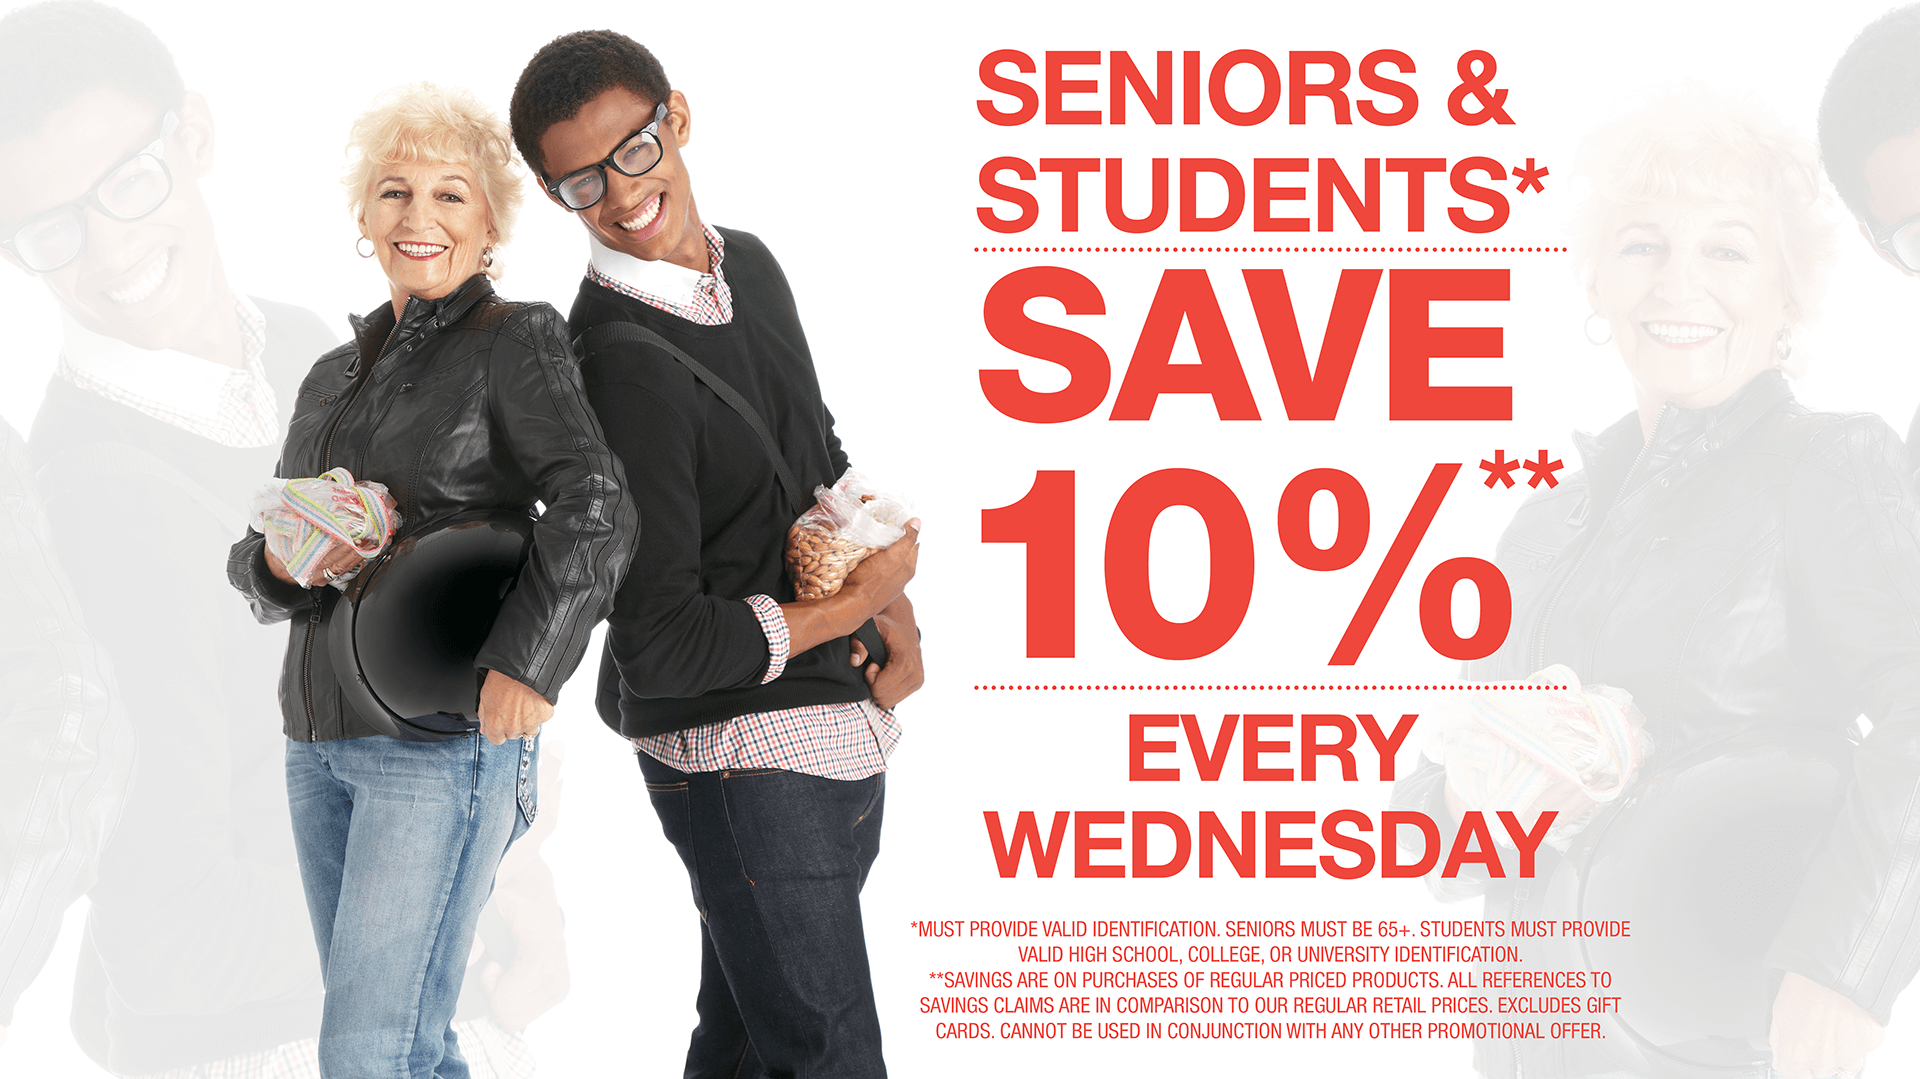 *Must provide valid identification. Seniors must be 65+. Students must provide valid high school, college, or university identification. **Savings are on purchases of regular priced products. All references to savings claims are in comparison to our regular retail prices. Excludes gift cards. Cannot be used in conjunction with any other promotional offer.